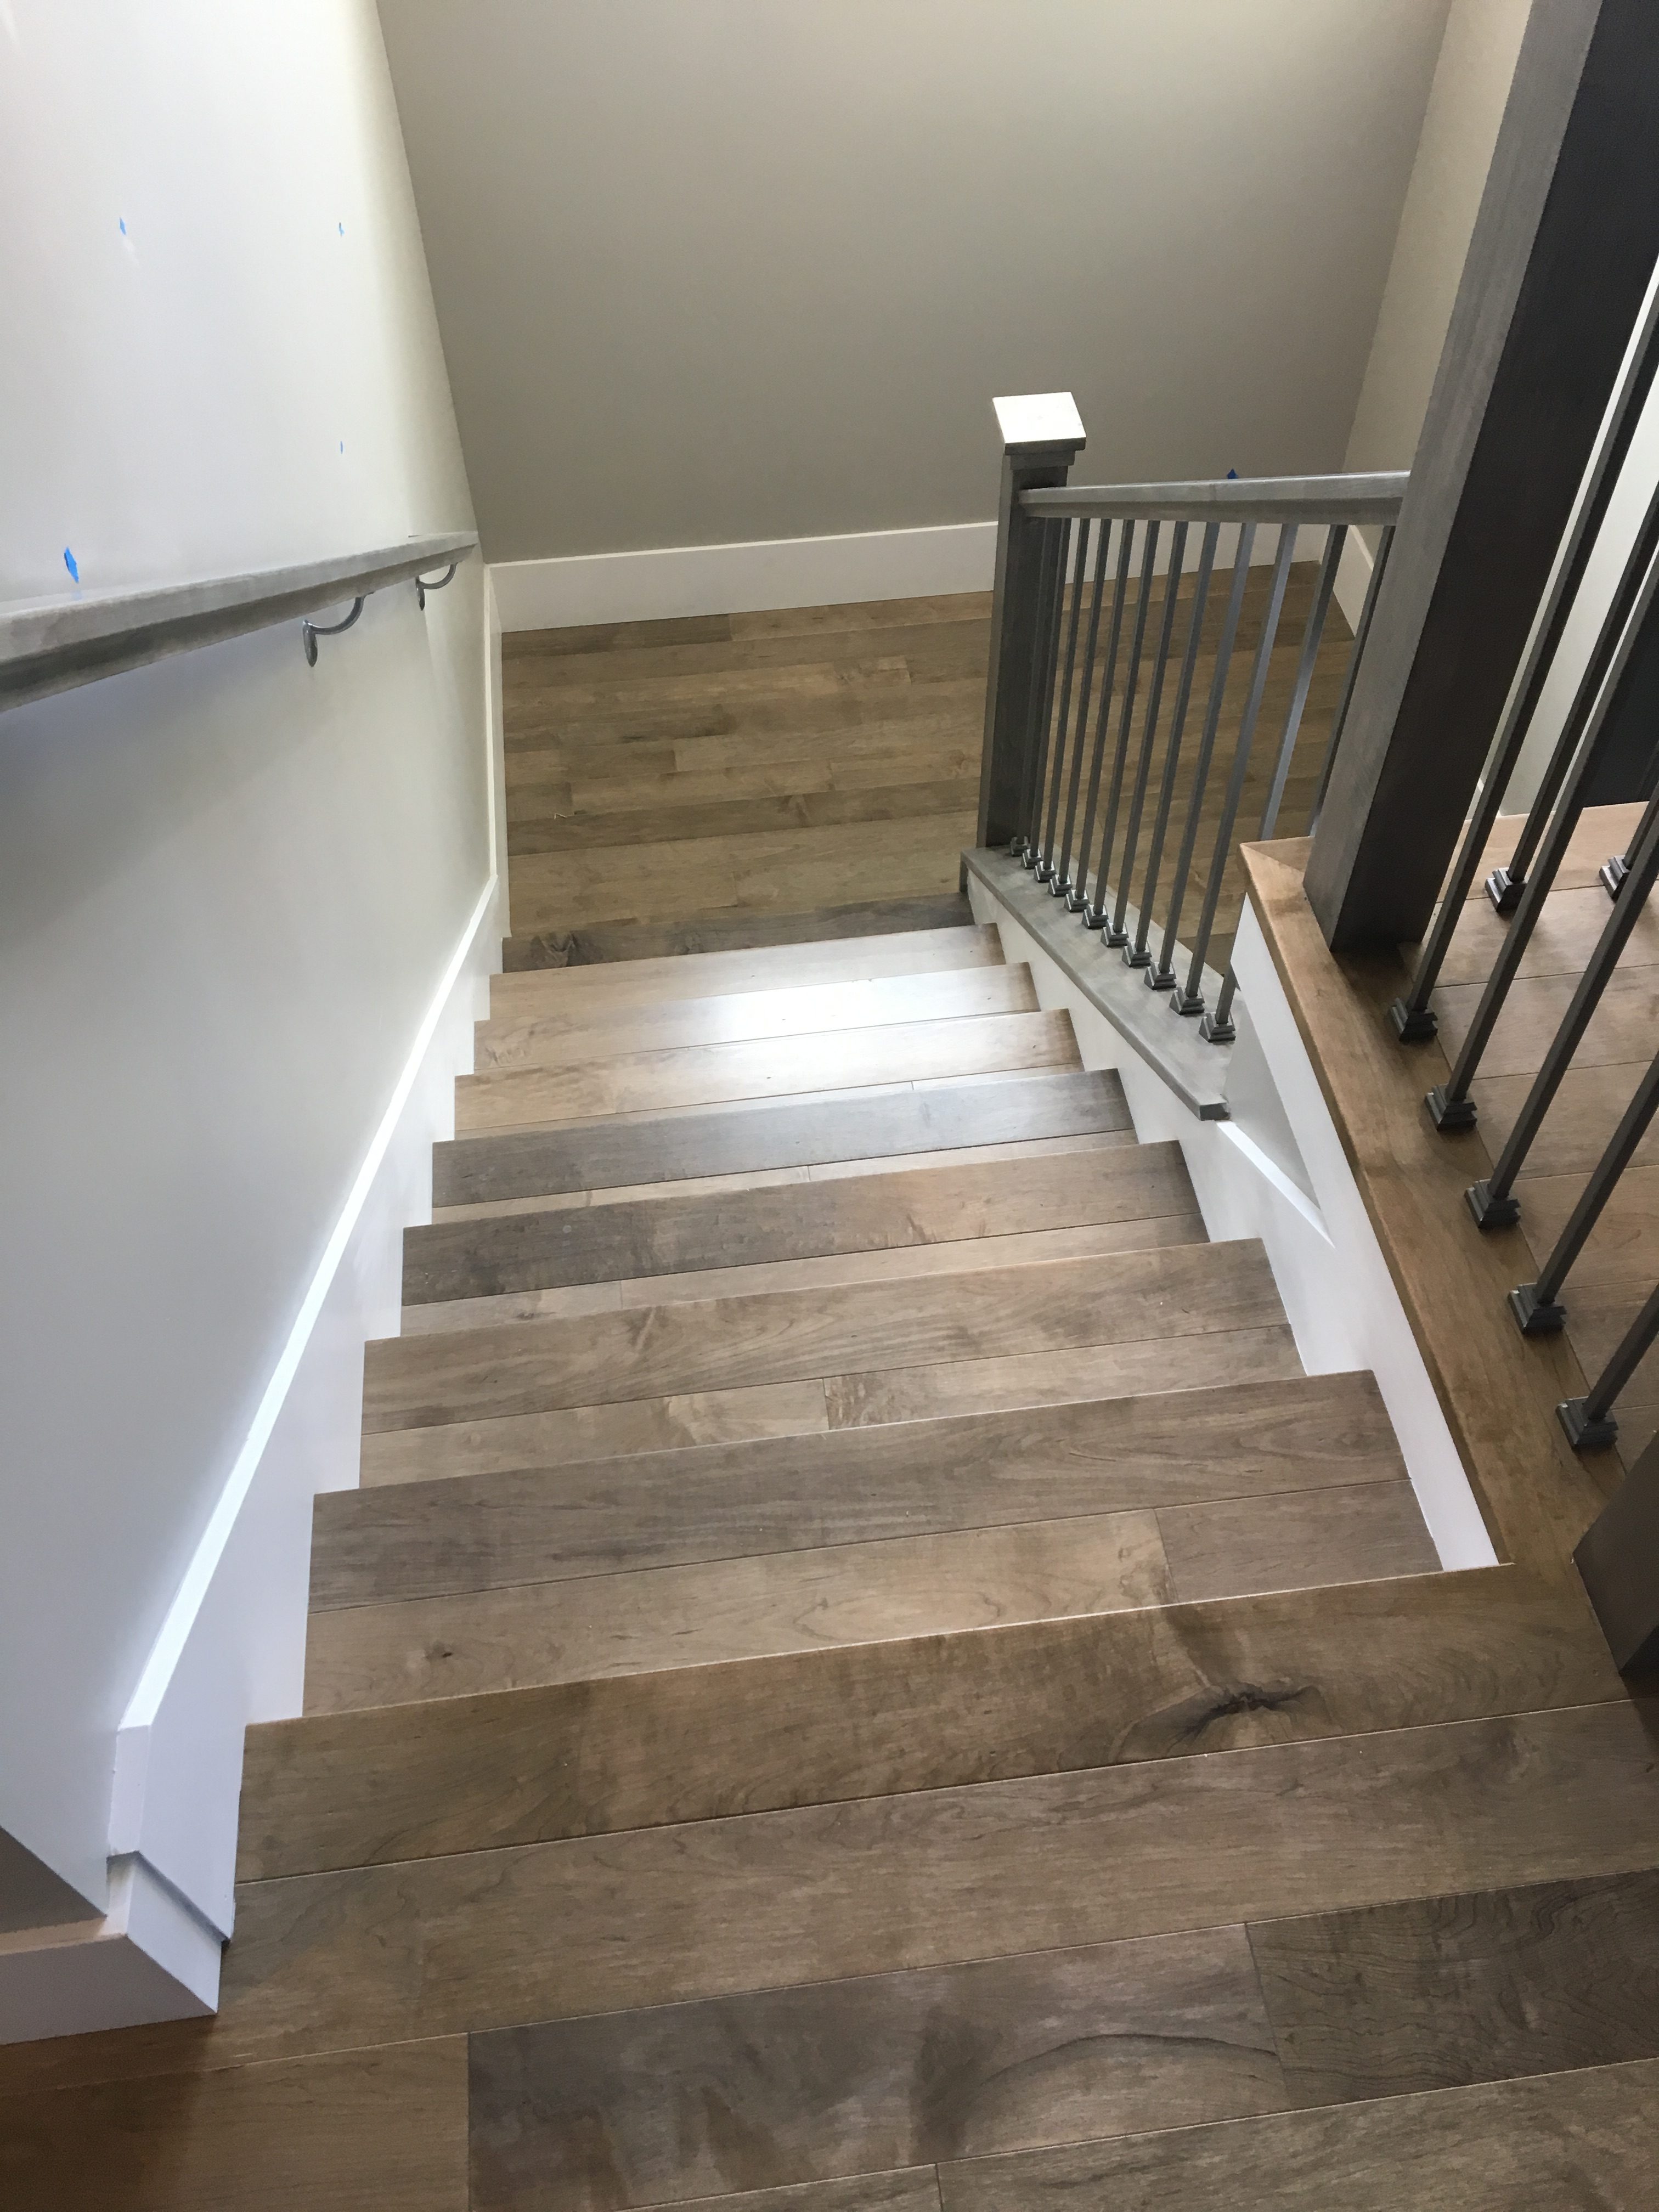 Stair One Select Wood Floors, How To Put Hardwood Flooring On Stairs